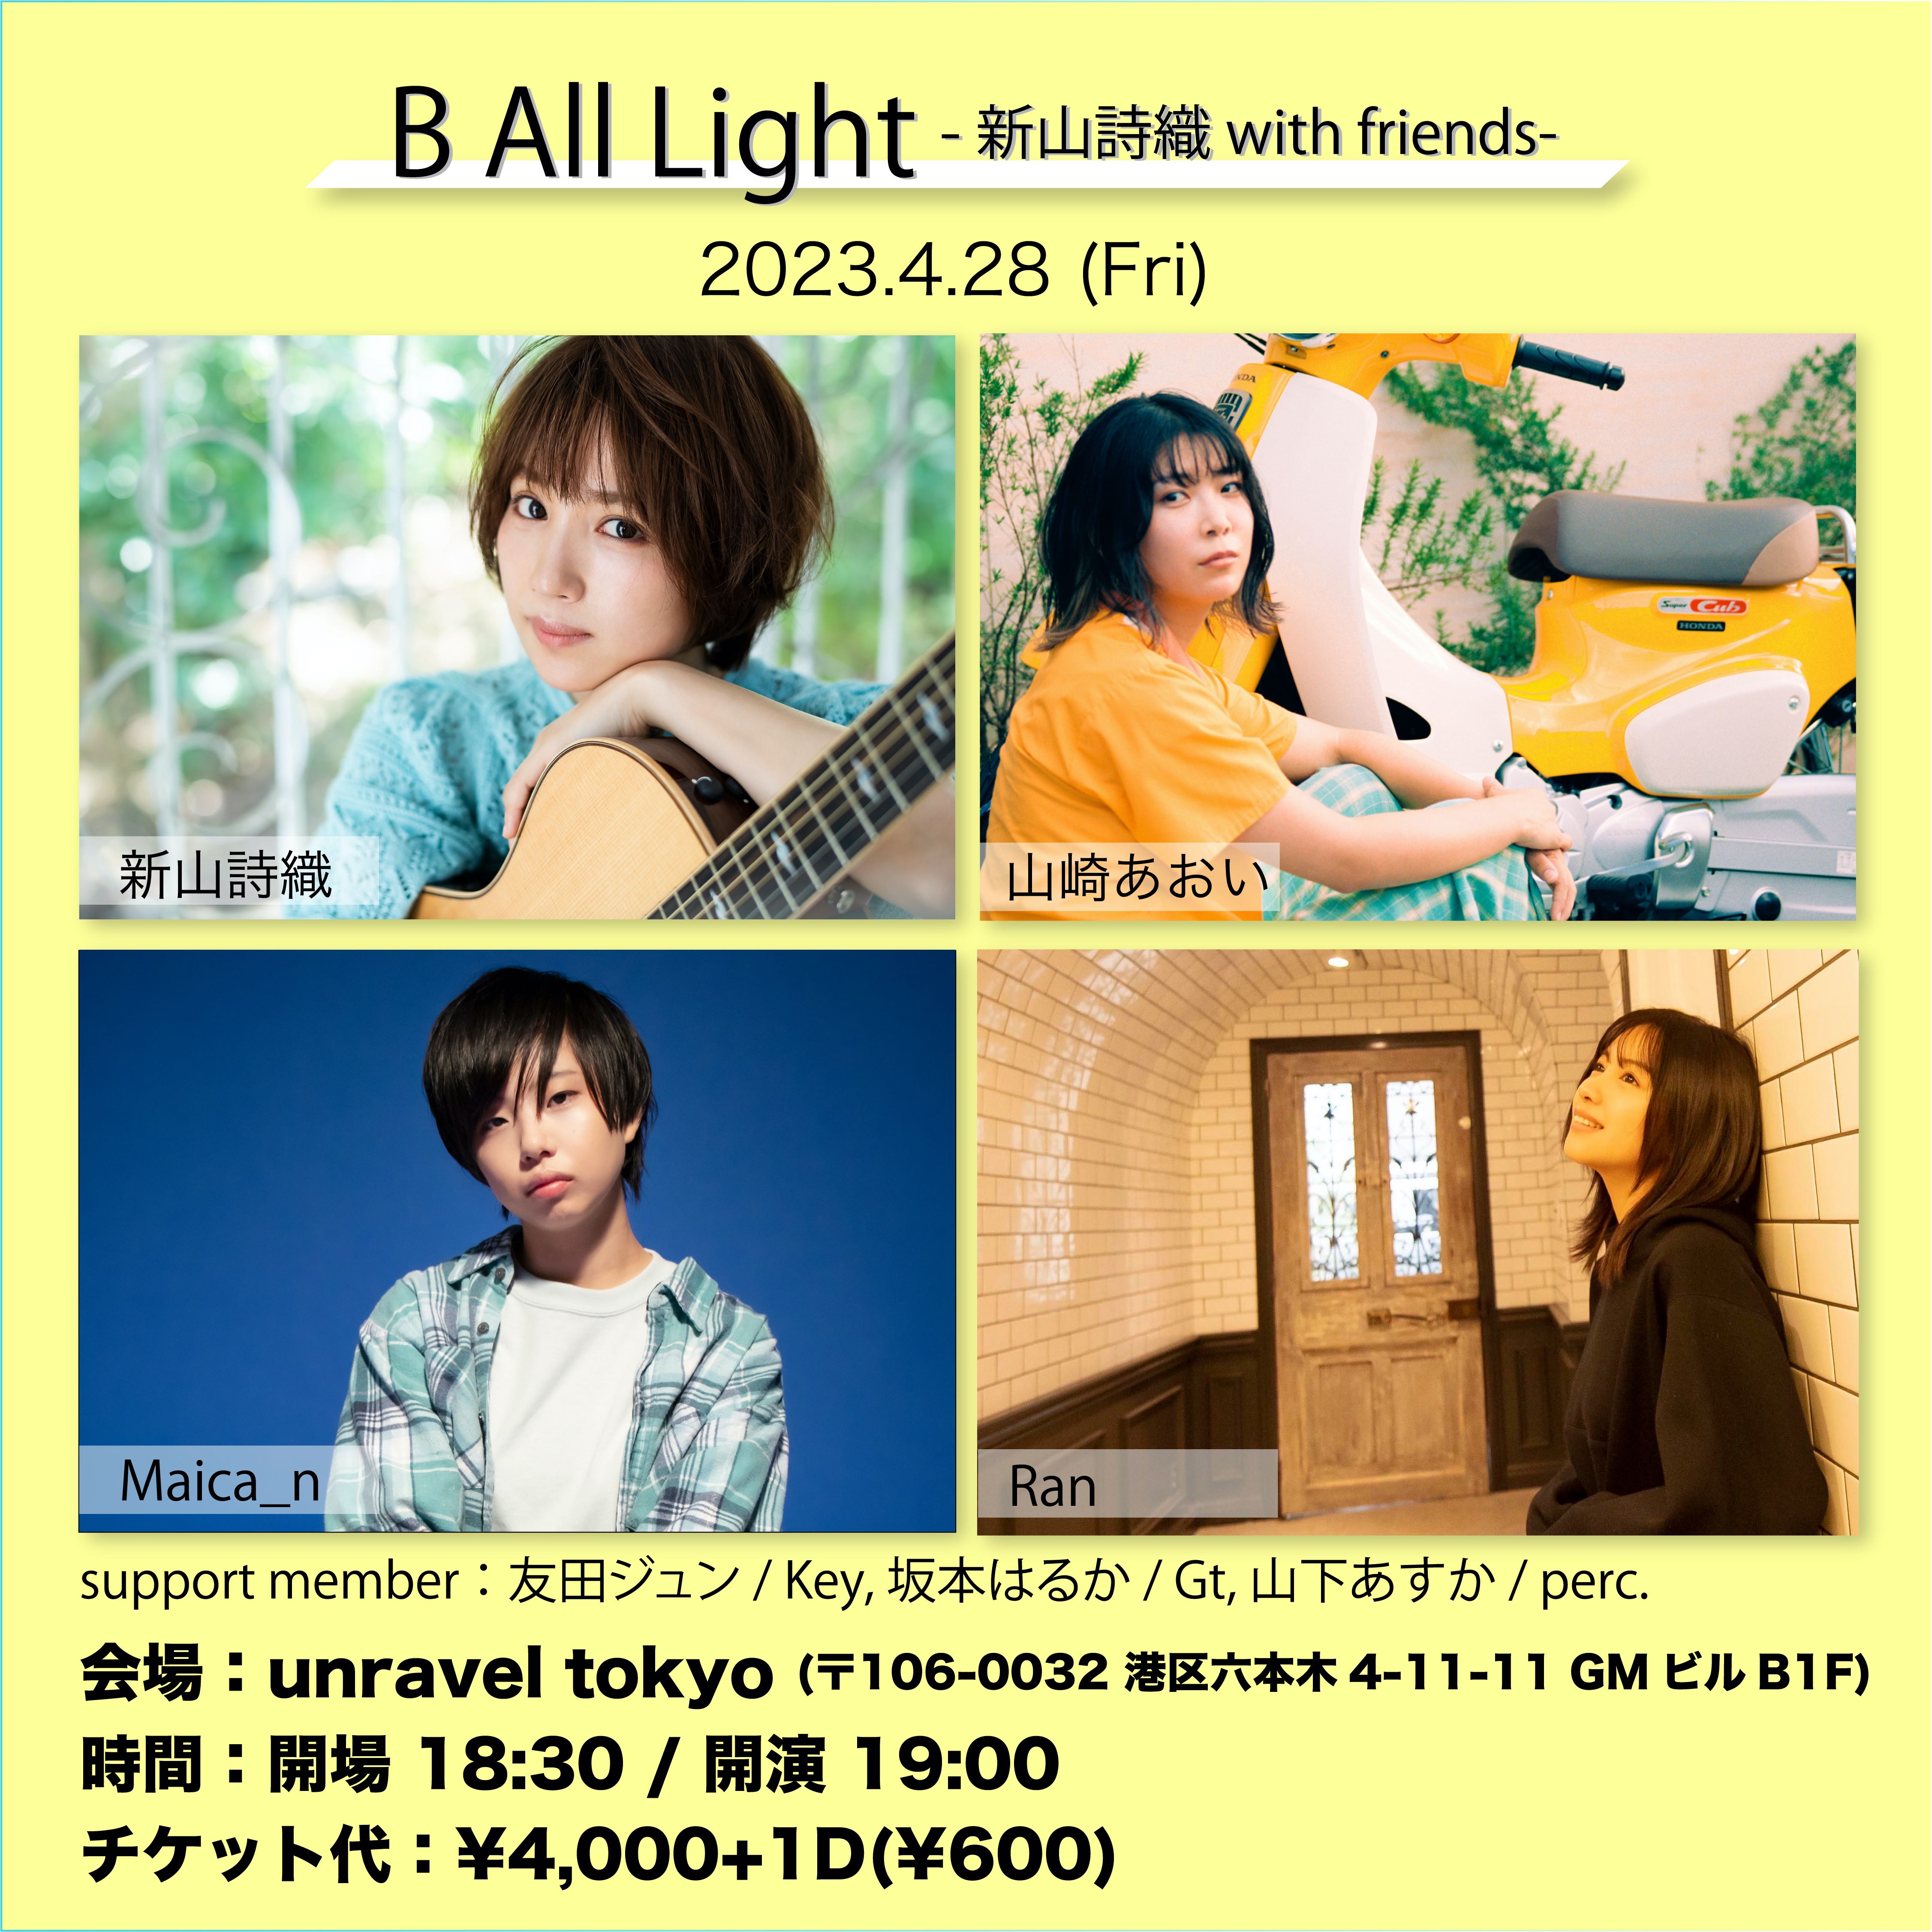 「B All Light - 新山詩織 with friends -」